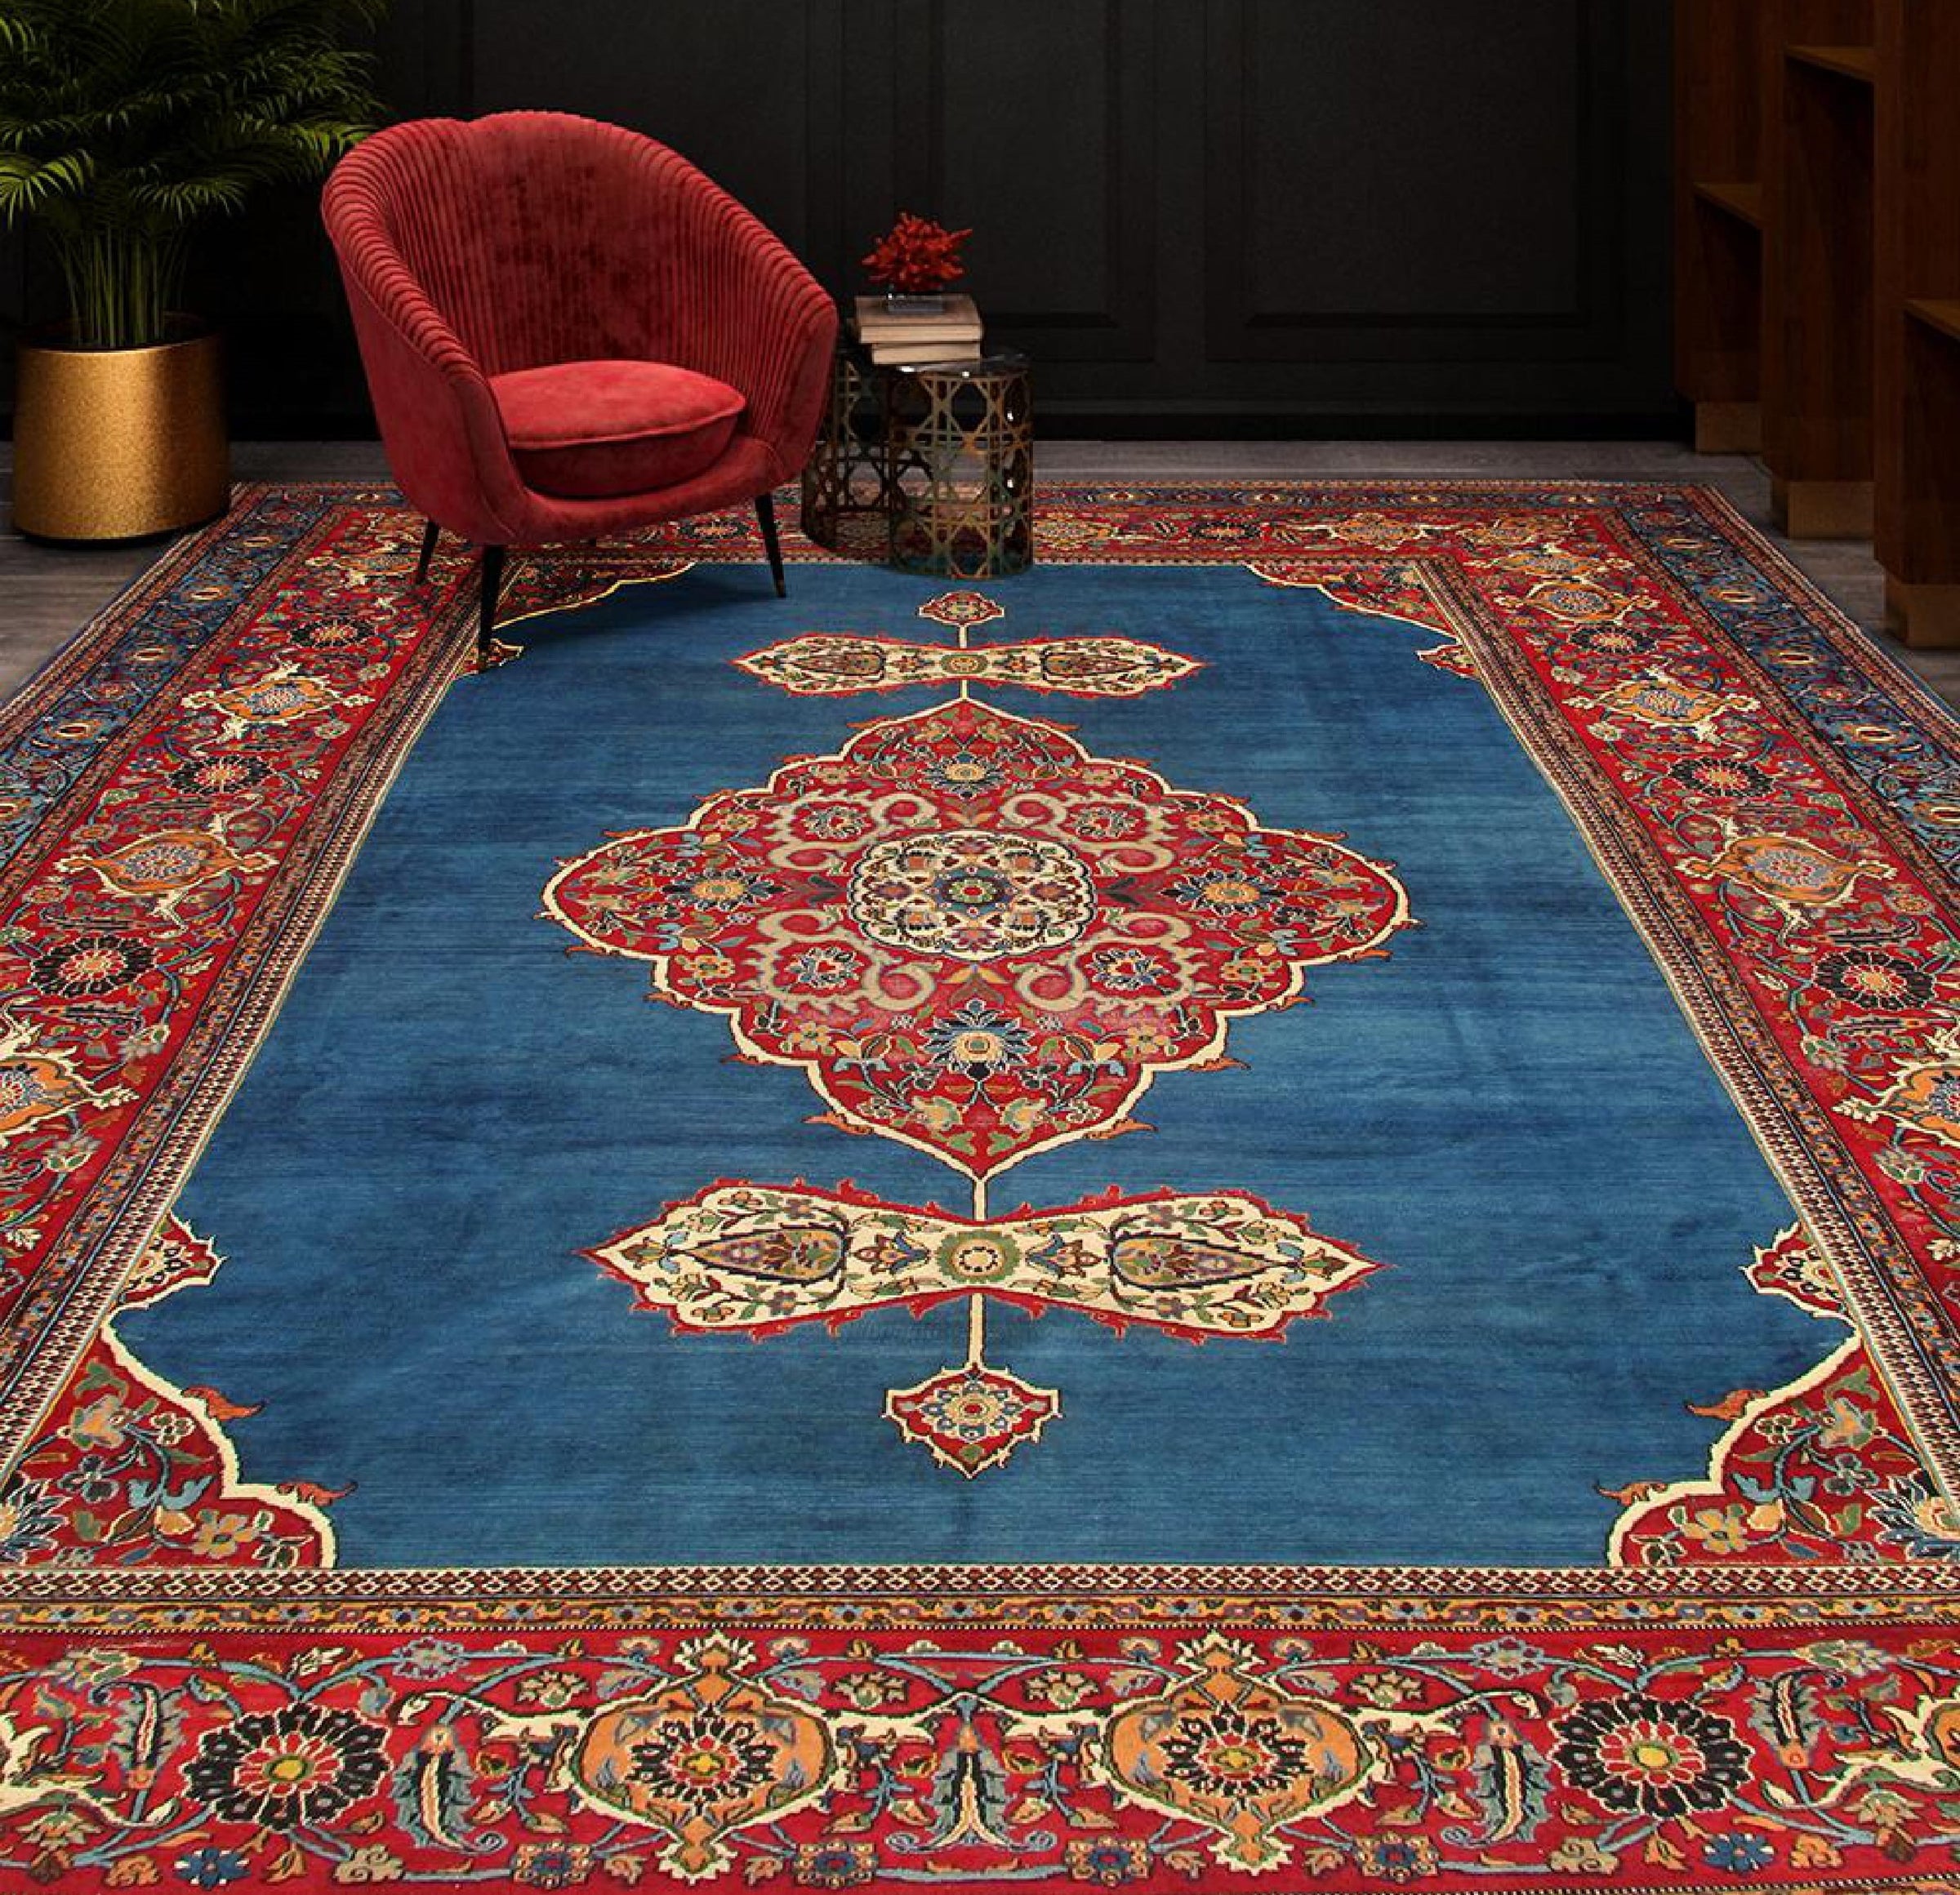 New & Antique Decorative Rugs Since 1940,